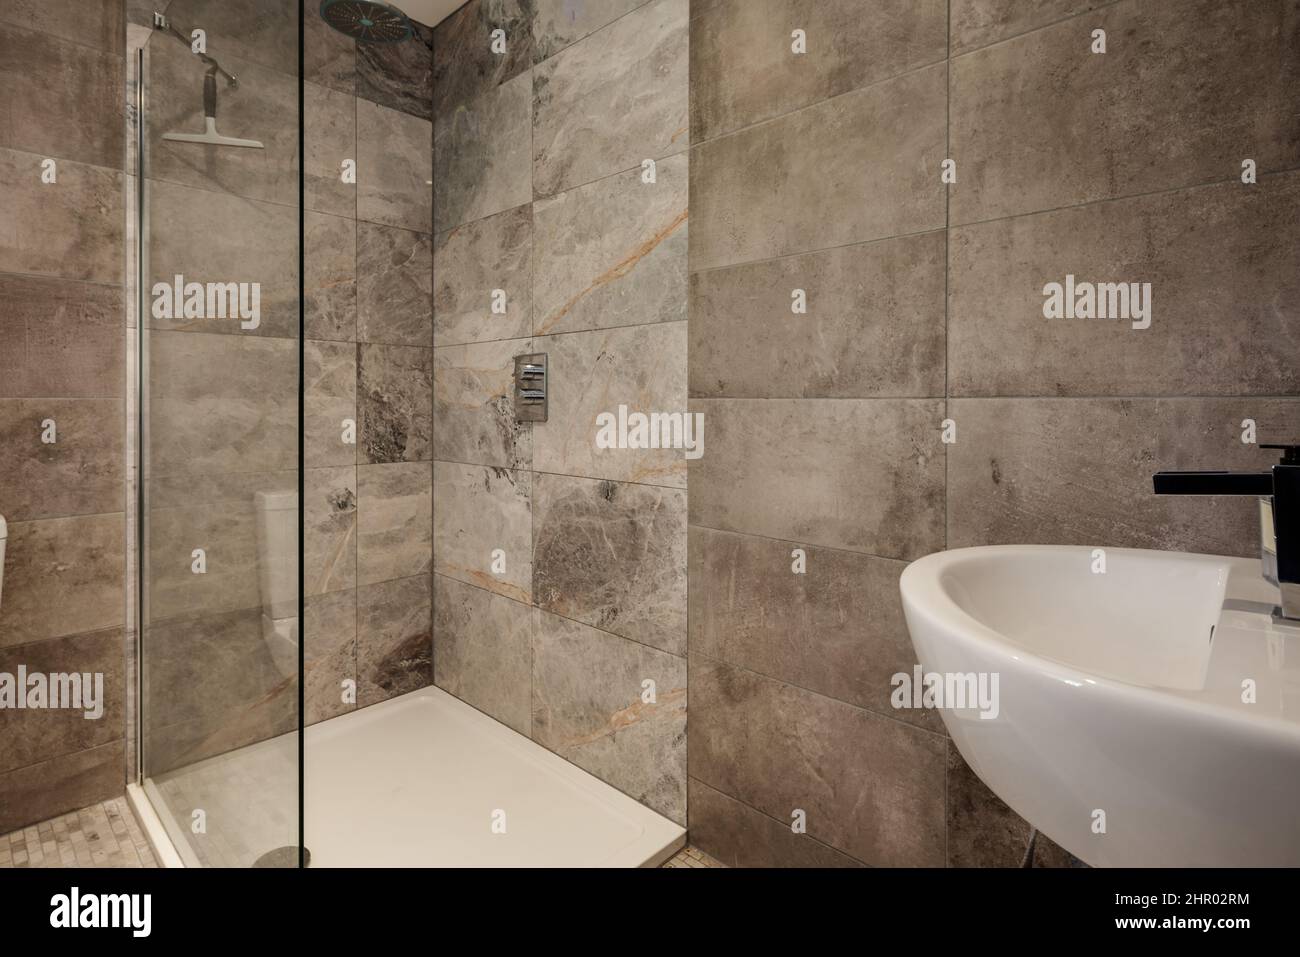 Fully tiled shower and powder room with glass shower cubicle Stock Photo